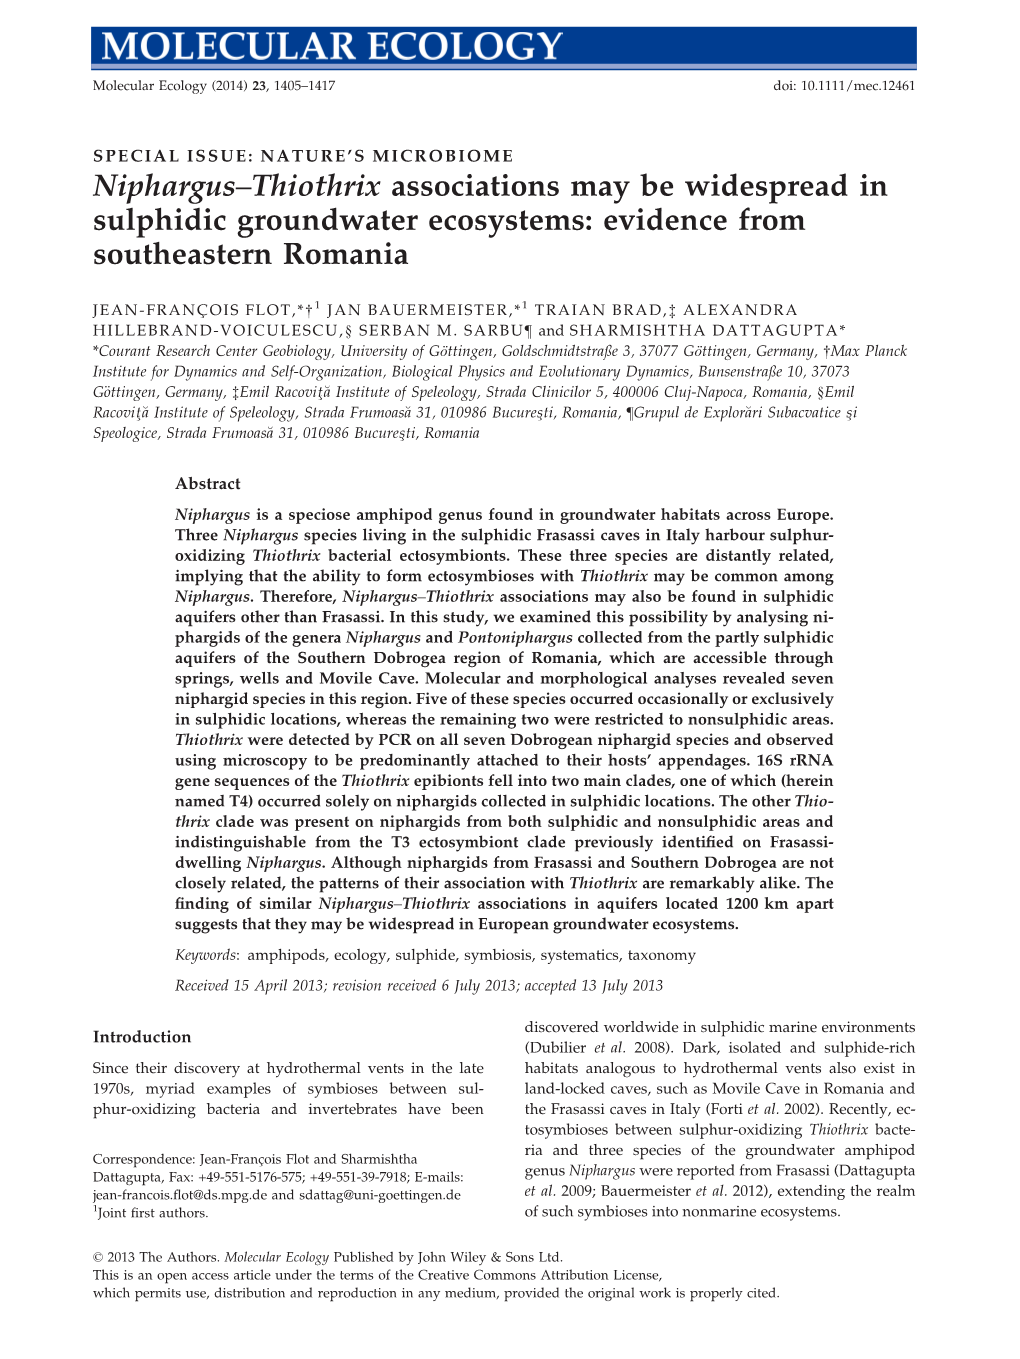 Niphargusthiothrix Associations May Be Widespread in Sulphidic Groundwater Ecosystems: Evidence from Southeastern Romania